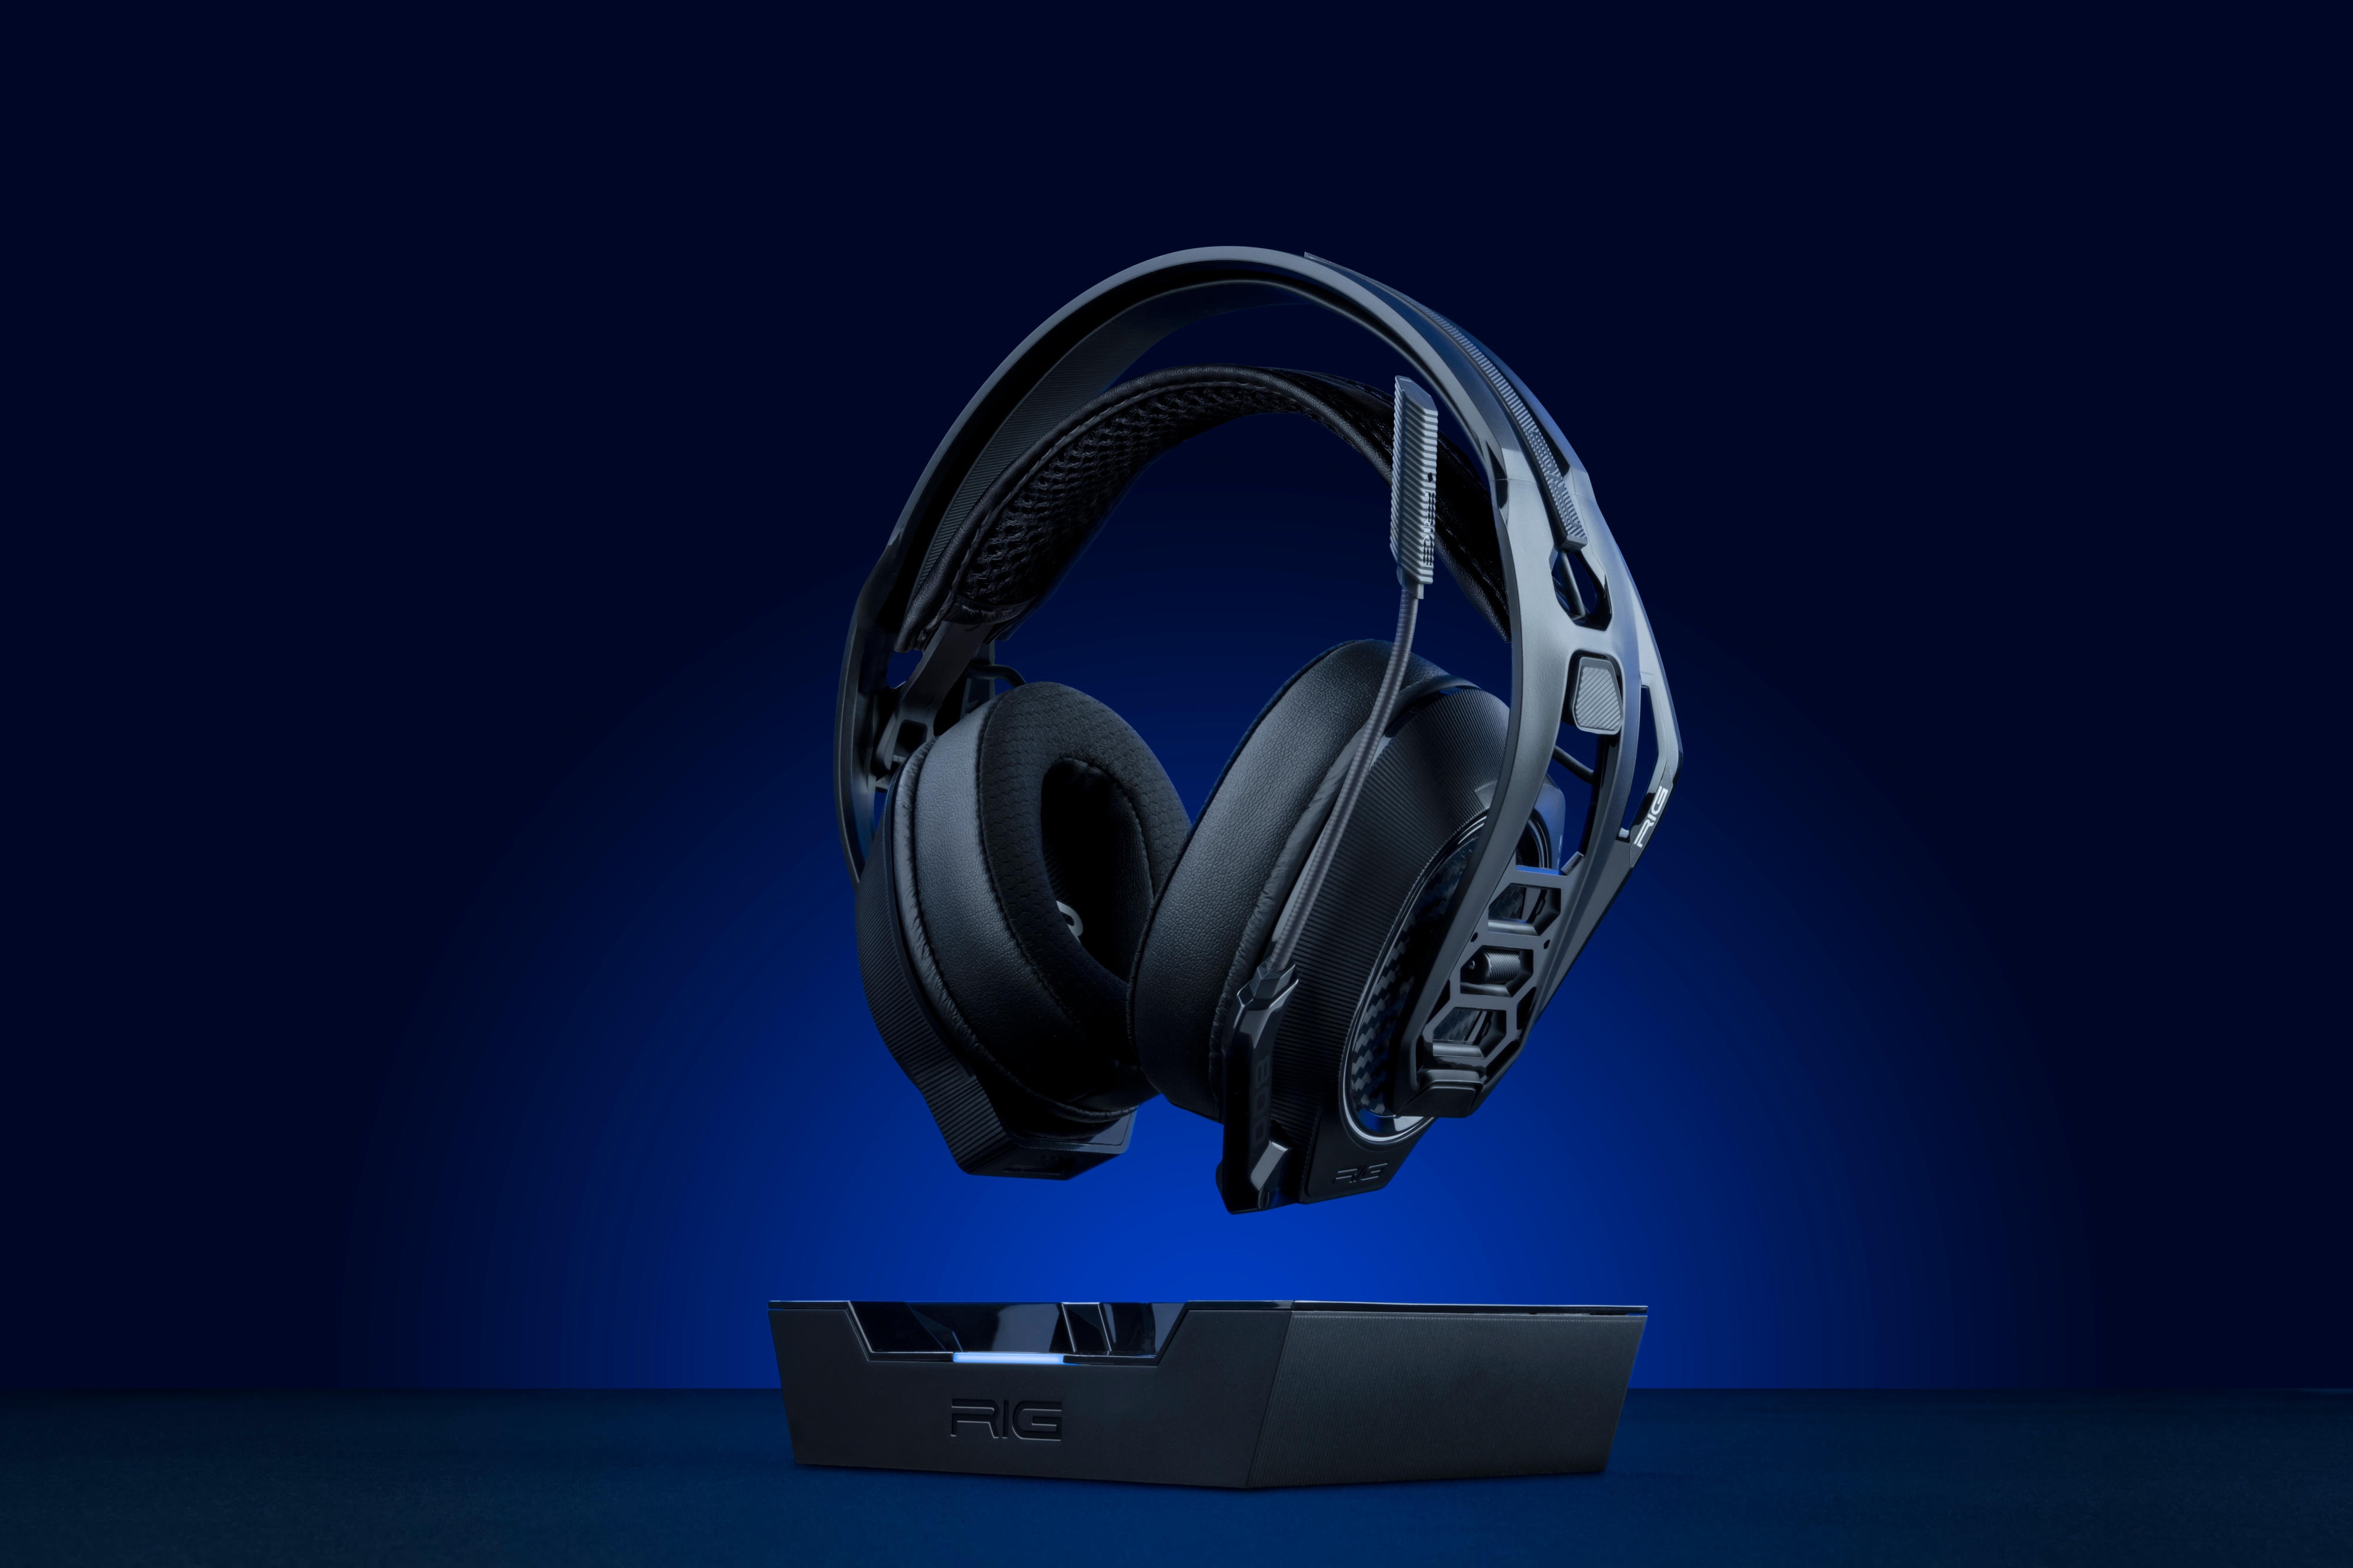 RIG 800 PRO HS headset with docking station